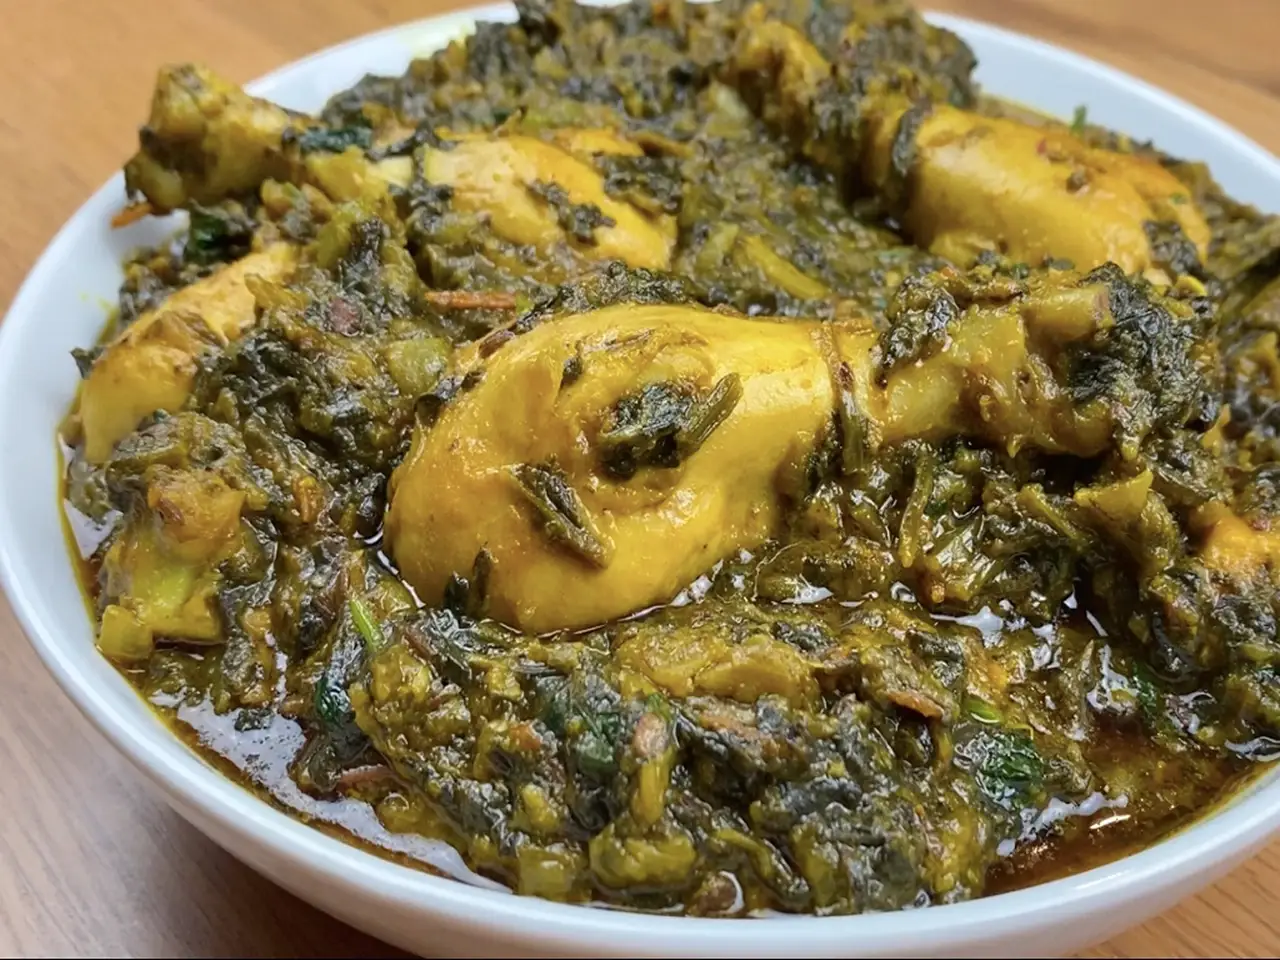 Palak chicken is made with tender pieces of boneless chicken breast and spinach leaves simmered in an onion-tomato gravy.